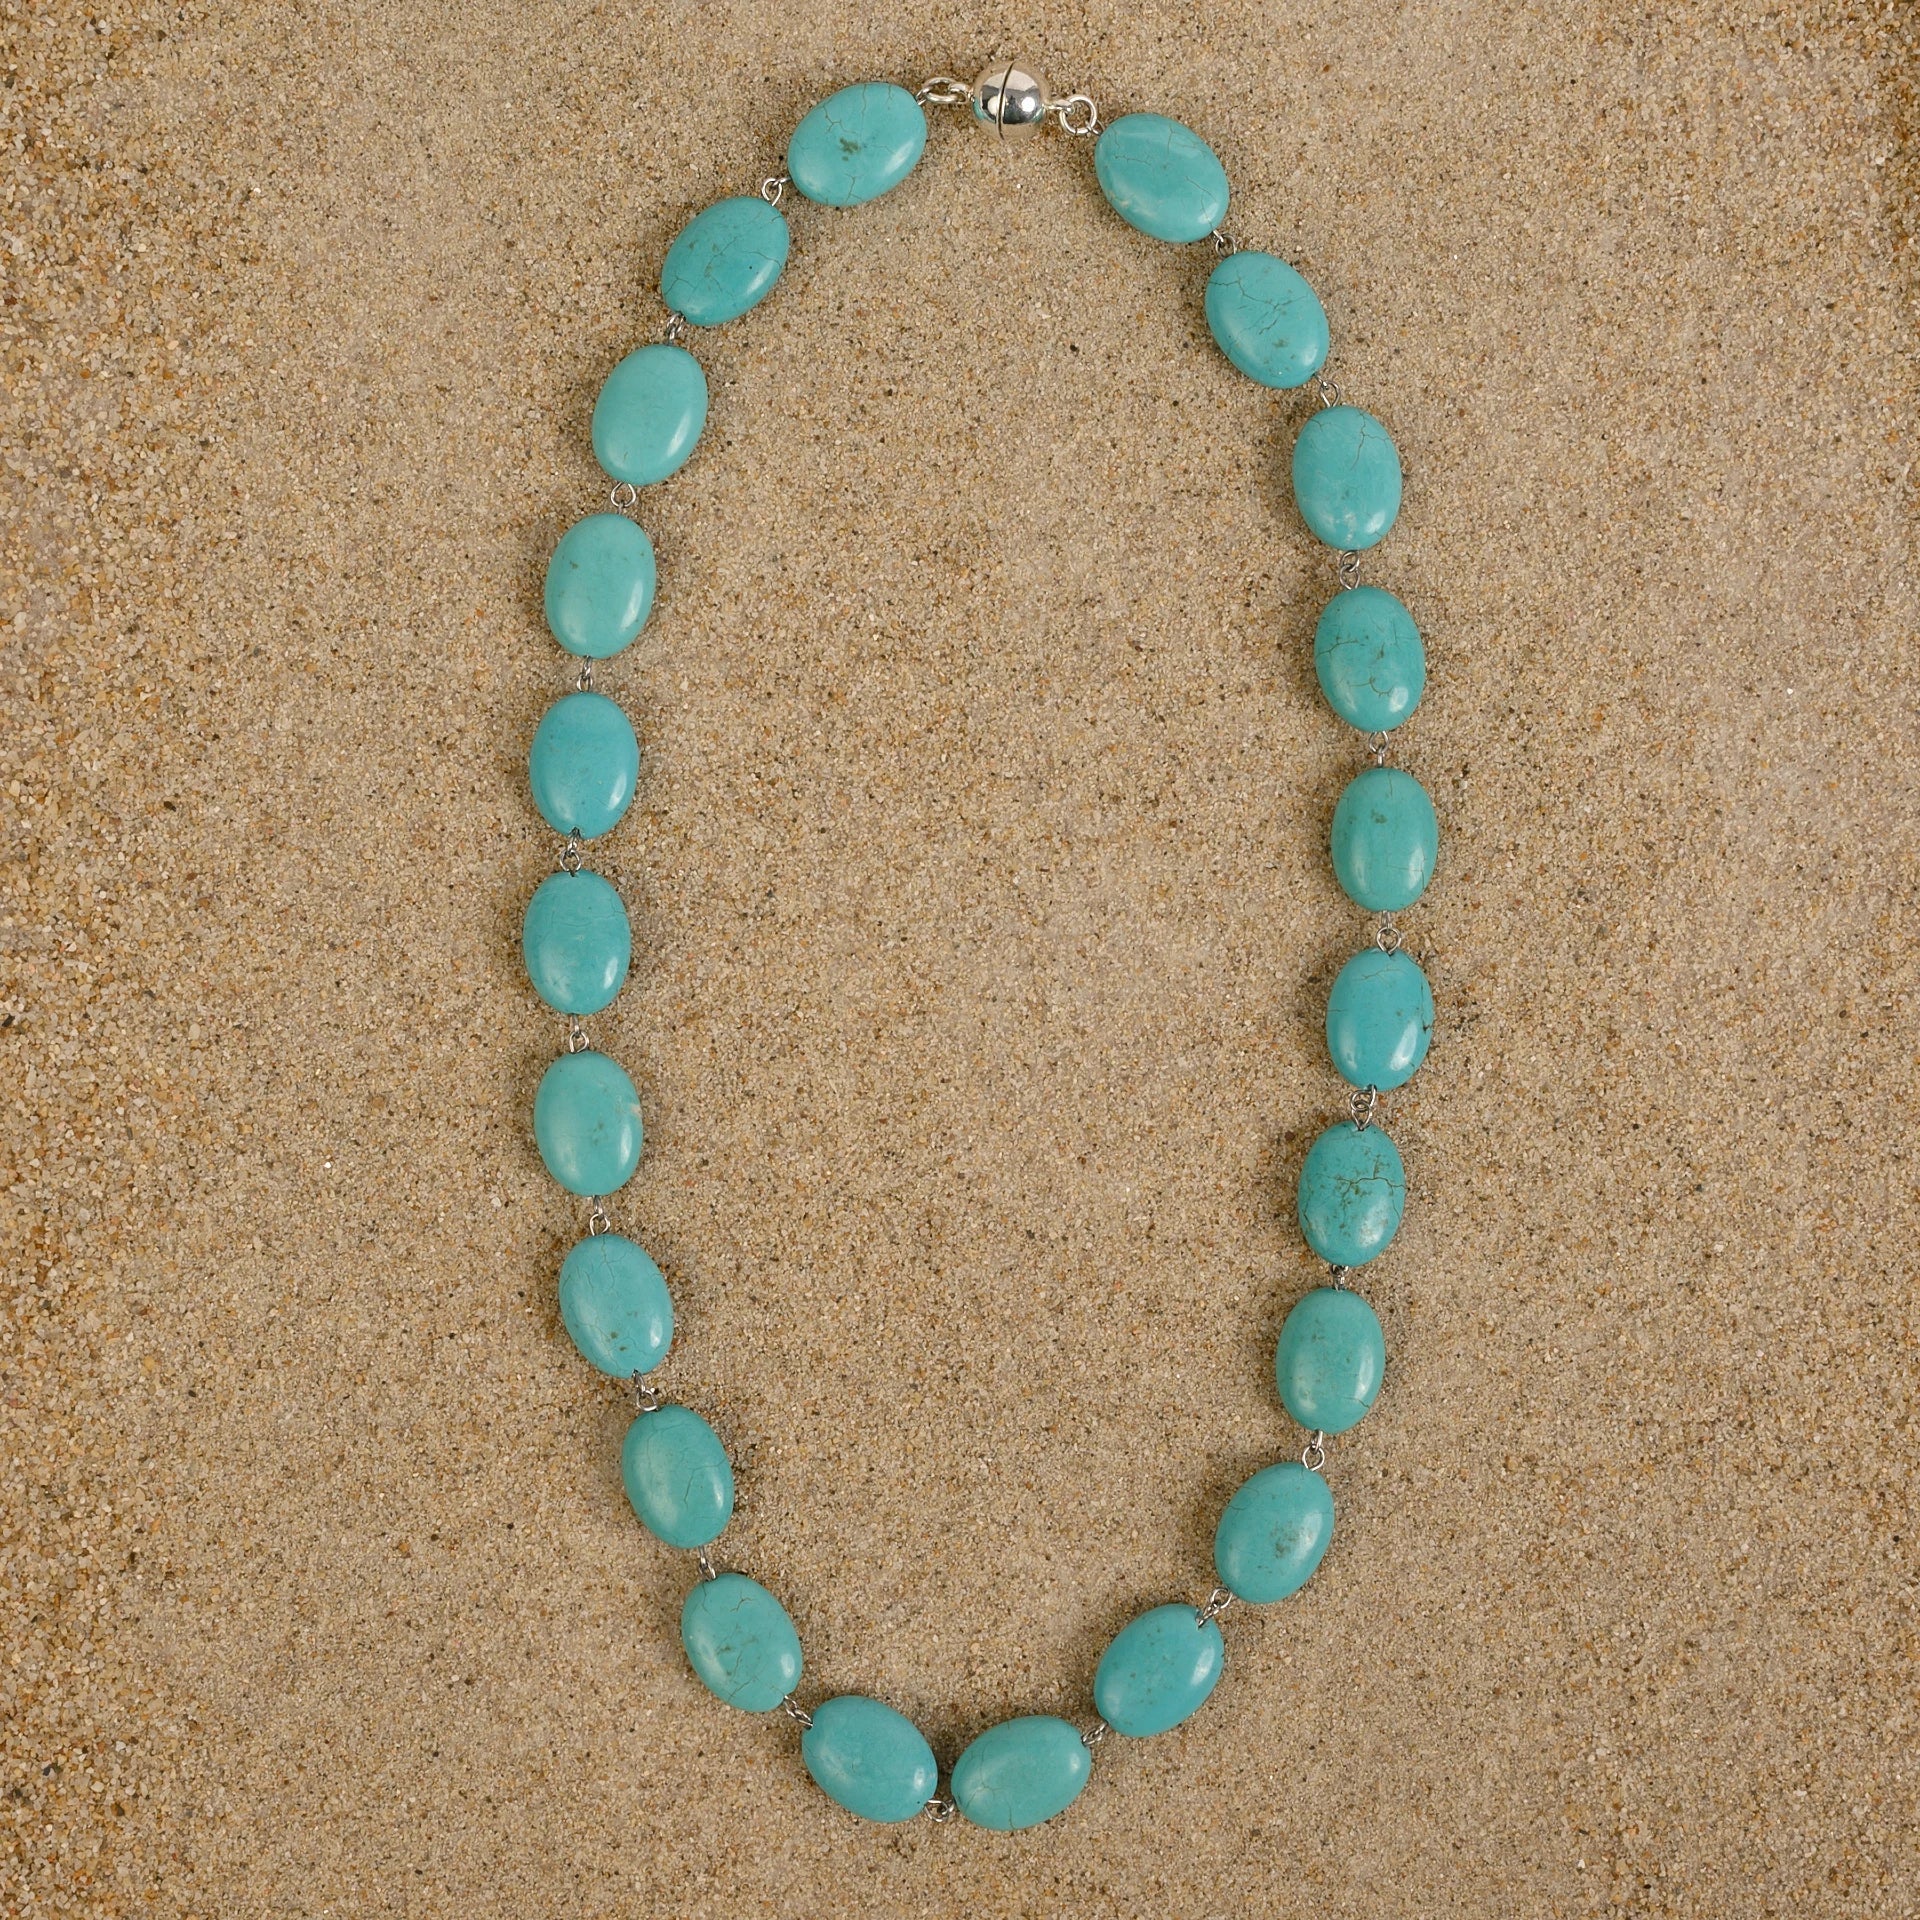 Windsor Turquoise Howlite Oval Chain Necklace Necklaces New Heritage Arts 